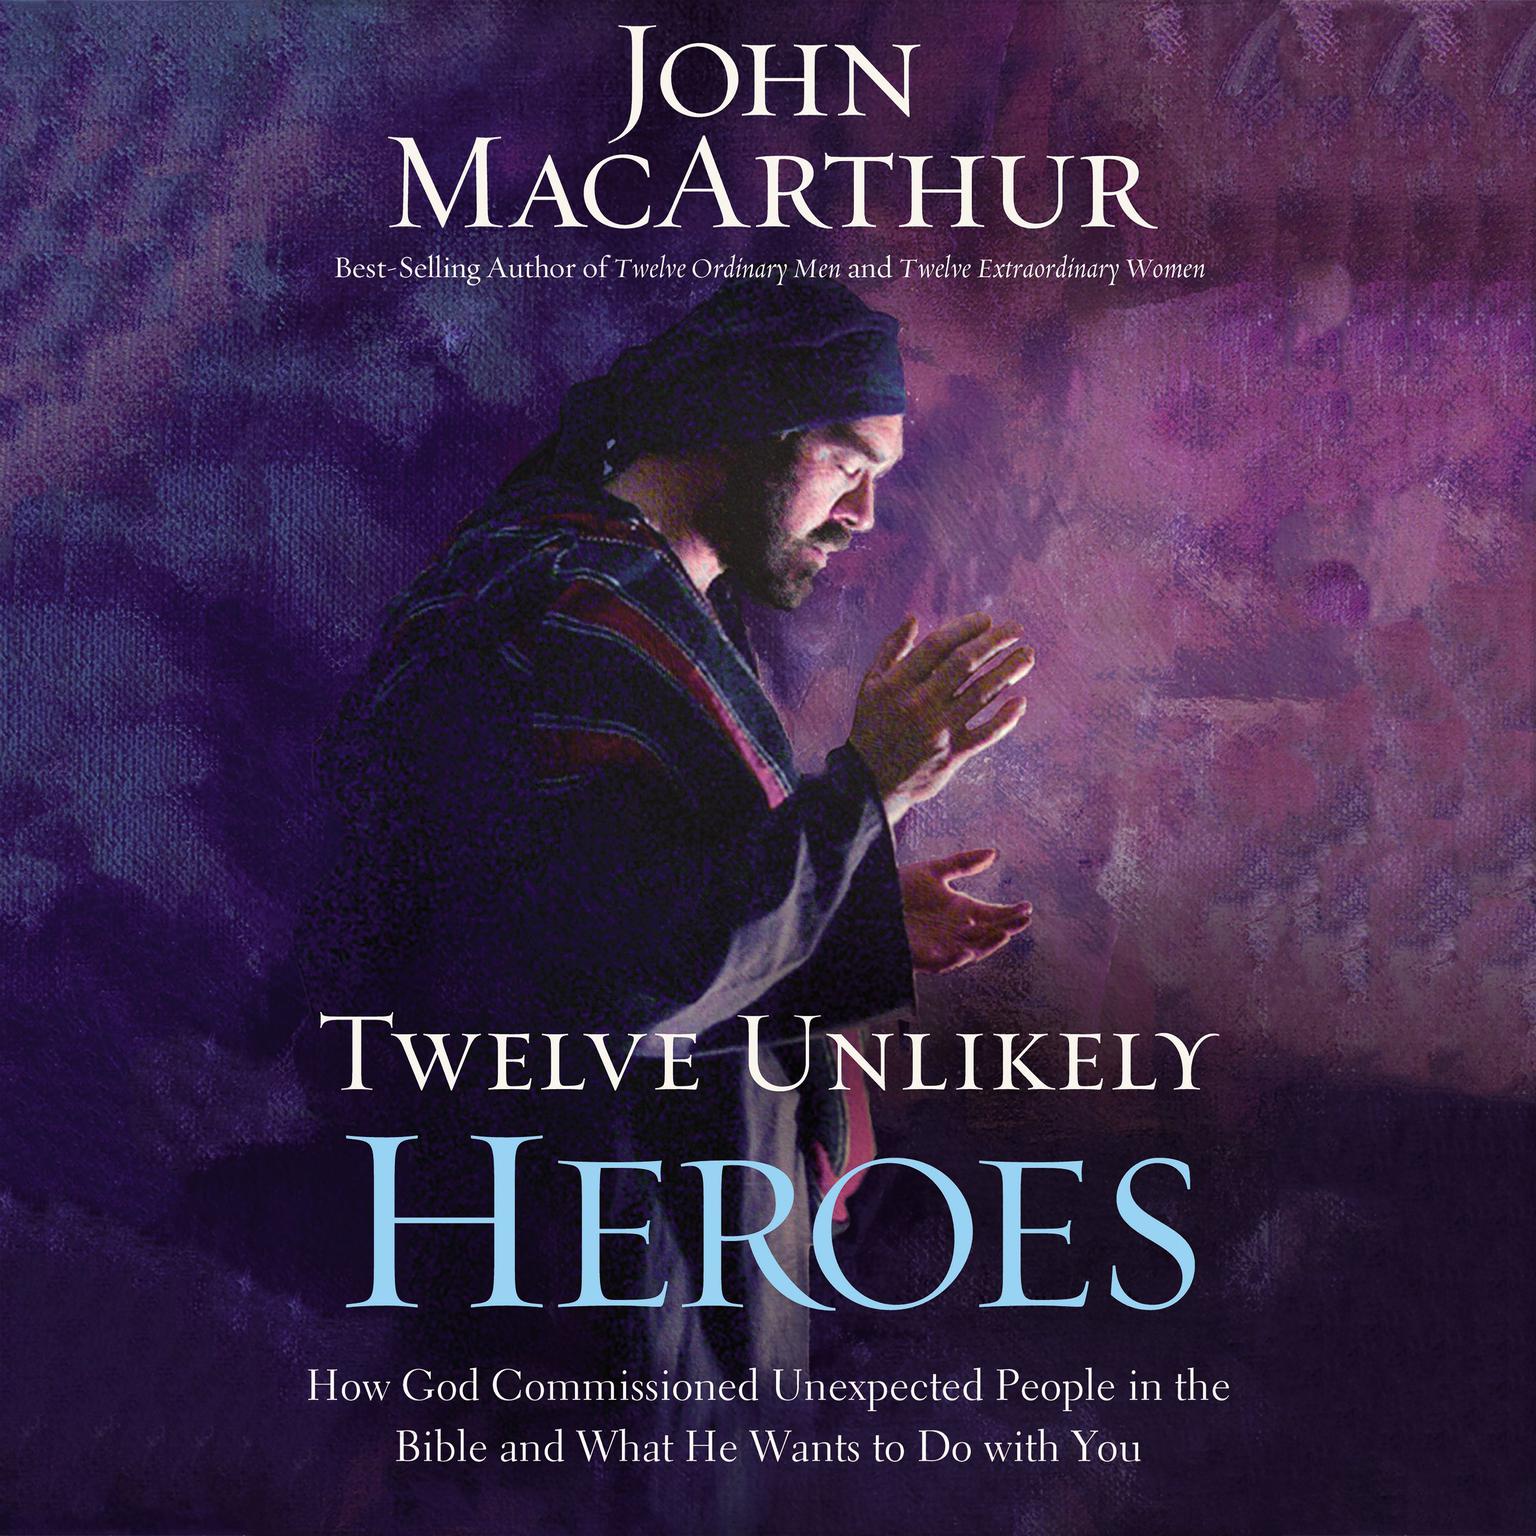 Twelve Unlikely Heroes: How God Commissioned Unexpected People in the Bible and What He Wants to Do with You Audiobook, by John MacArthur